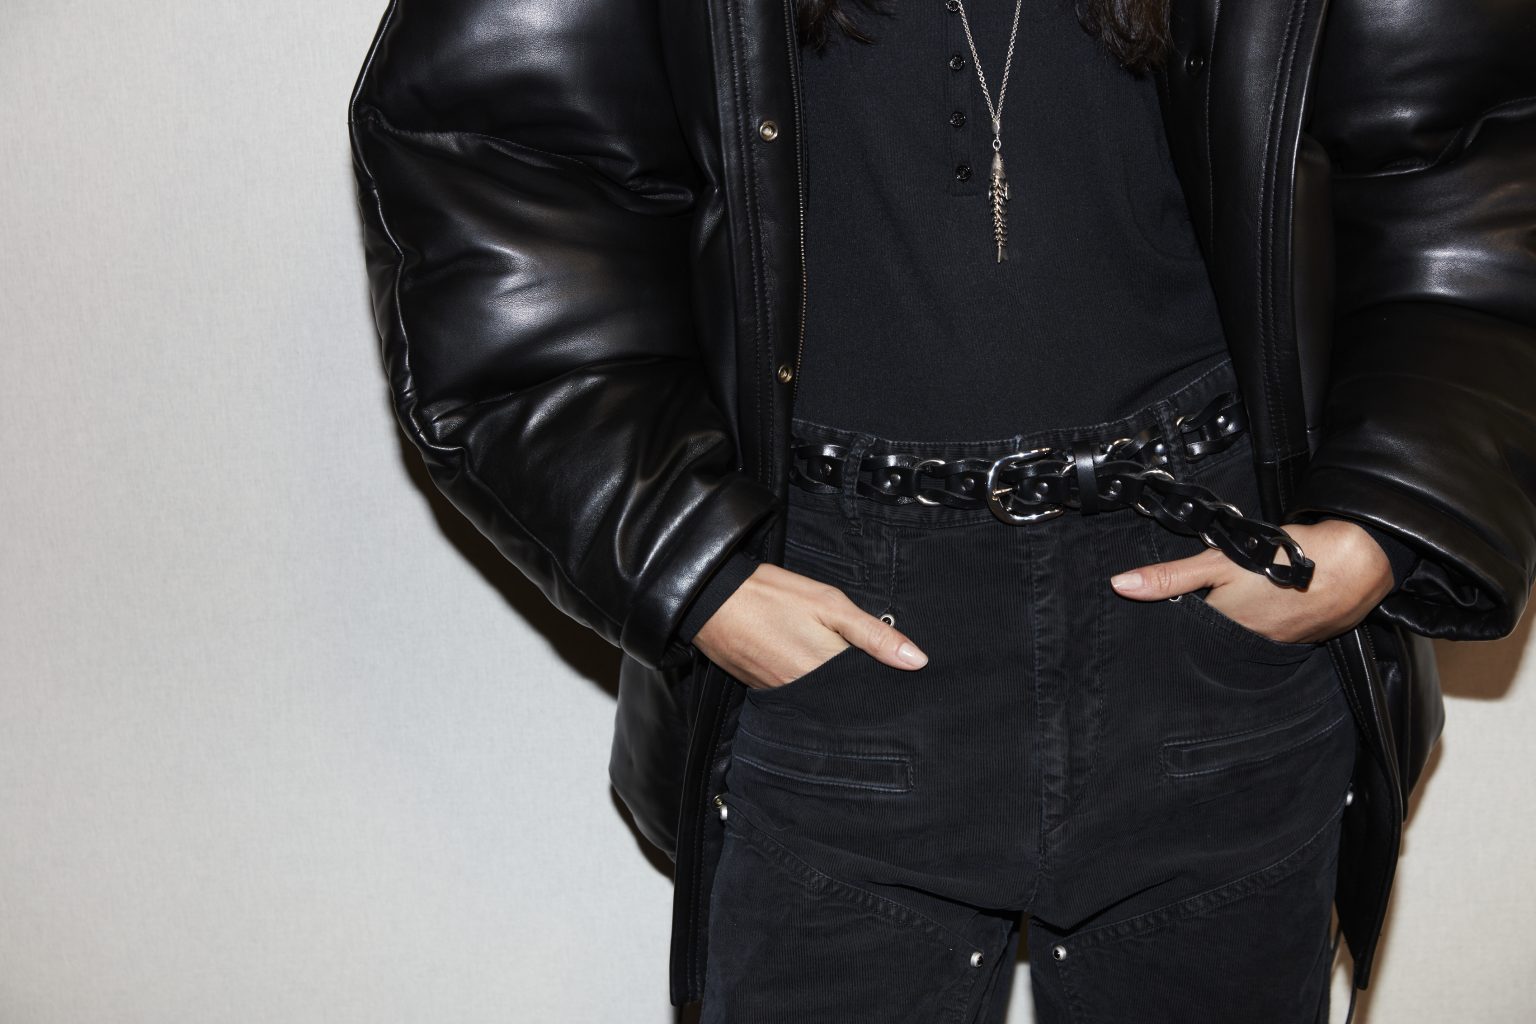 Female midsection with hands in pockets, wearing a shiny black puffy jacket, t-shirt and washed jeans with a braided belt, all in black.